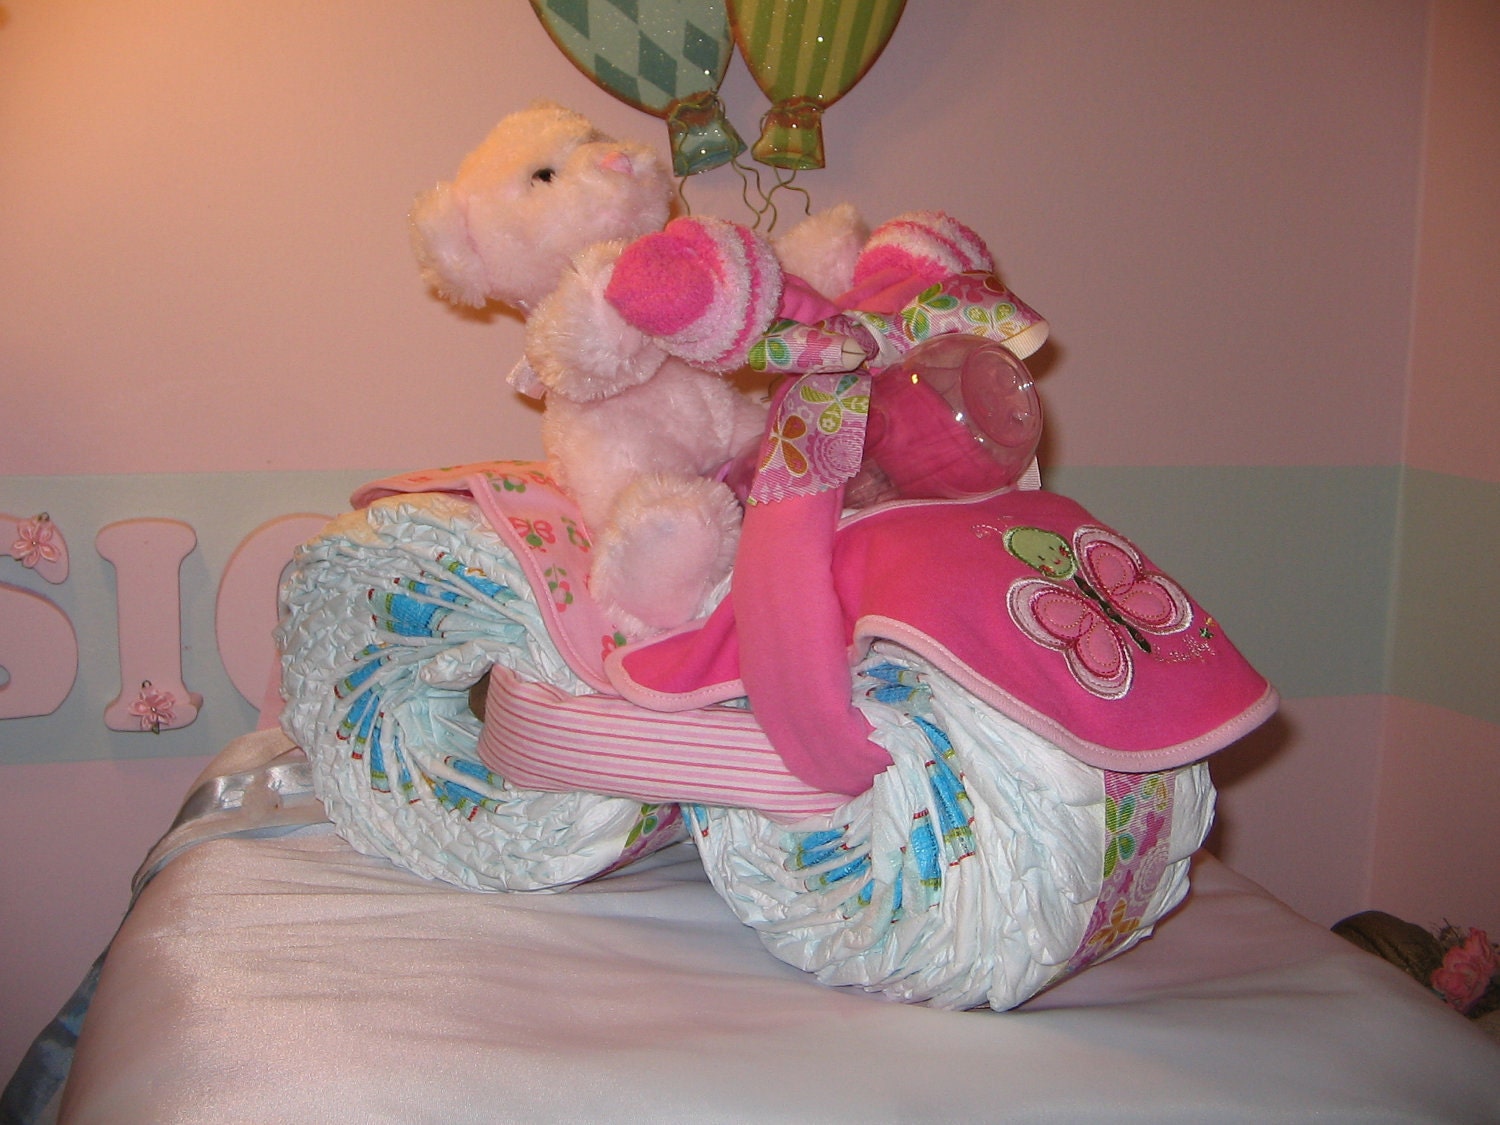 Tricycle Diaper Cake